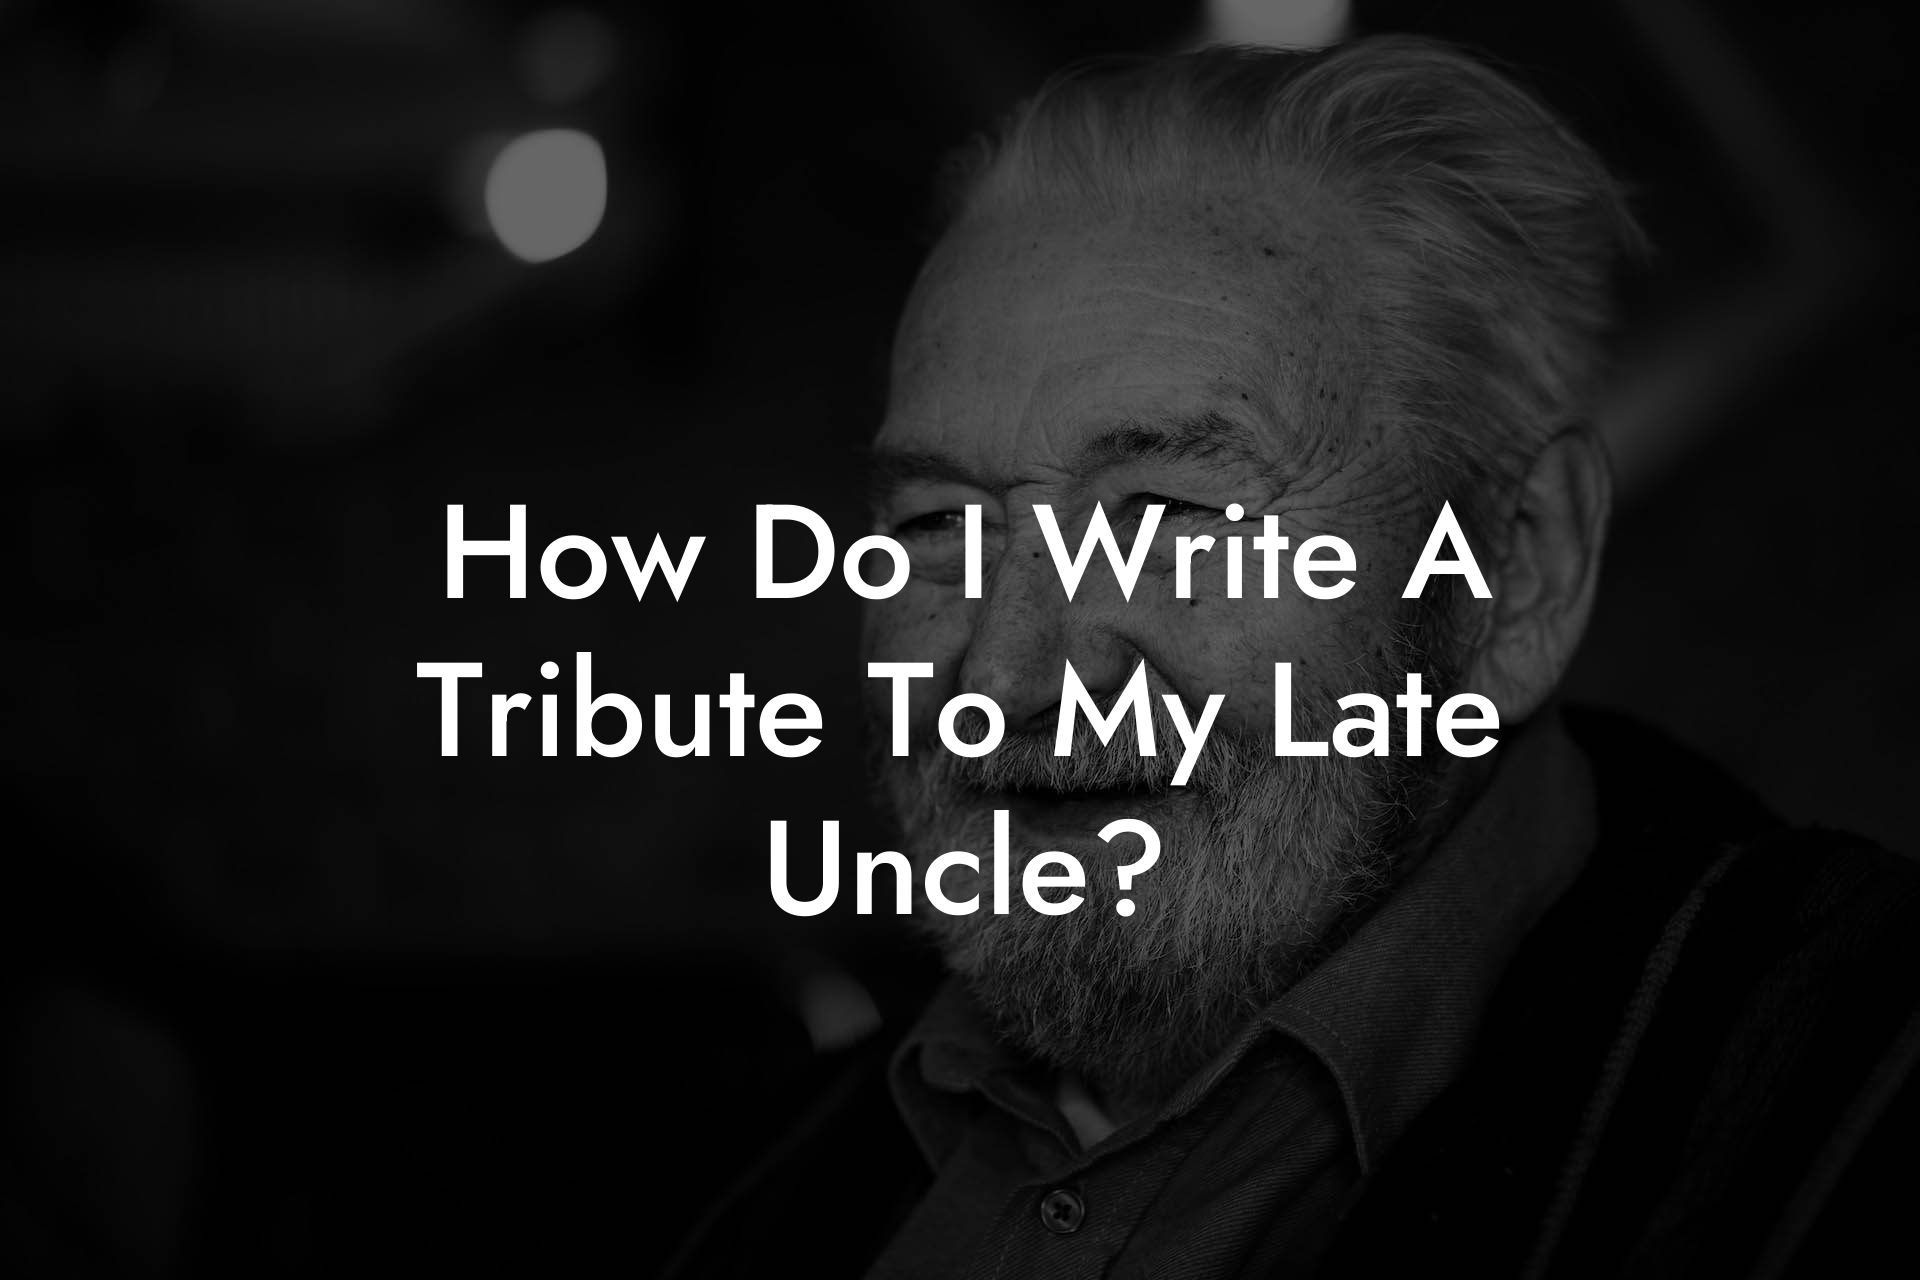 How Do I Write A Tribute To My Late Uncle?